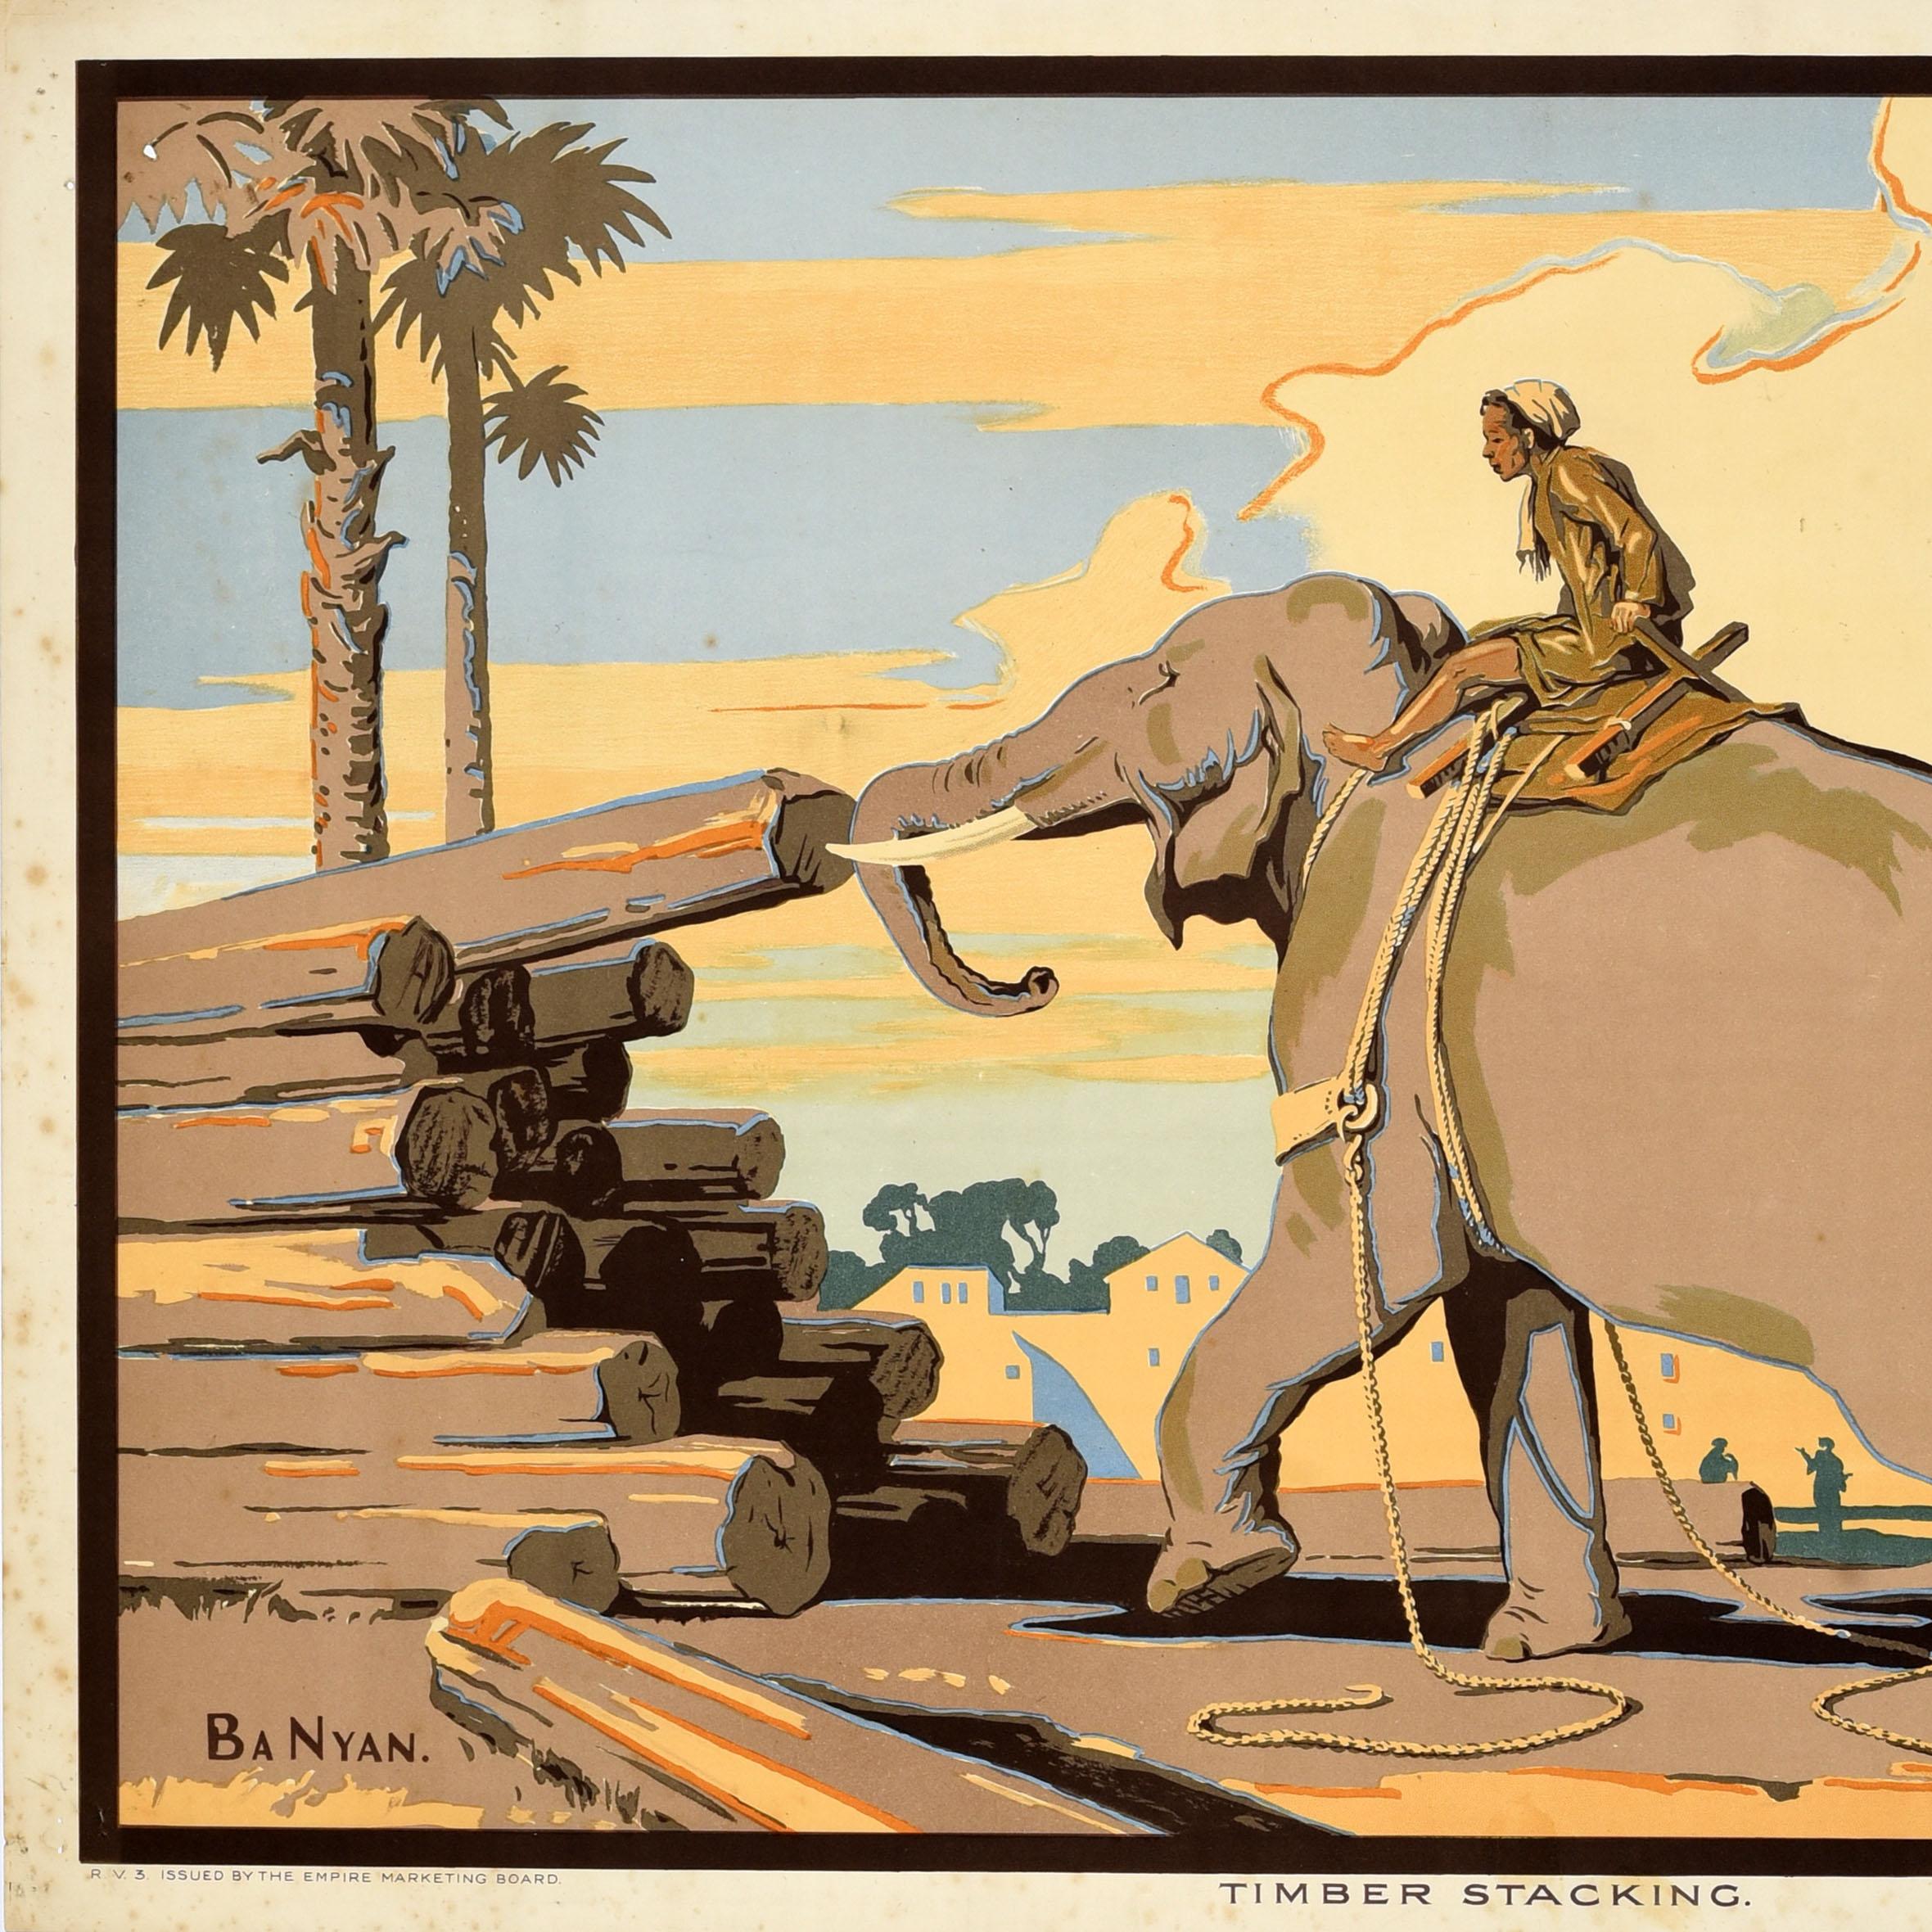 Original vintage poster - Timber Stacking - issued by the Empire Marketing Board (EMB 1926-1933) featuring artwork by the notable Burmese artist Ba Nyan (1897-1945) depicting a man riding an elephant and guiding it to stack up logs of wood with